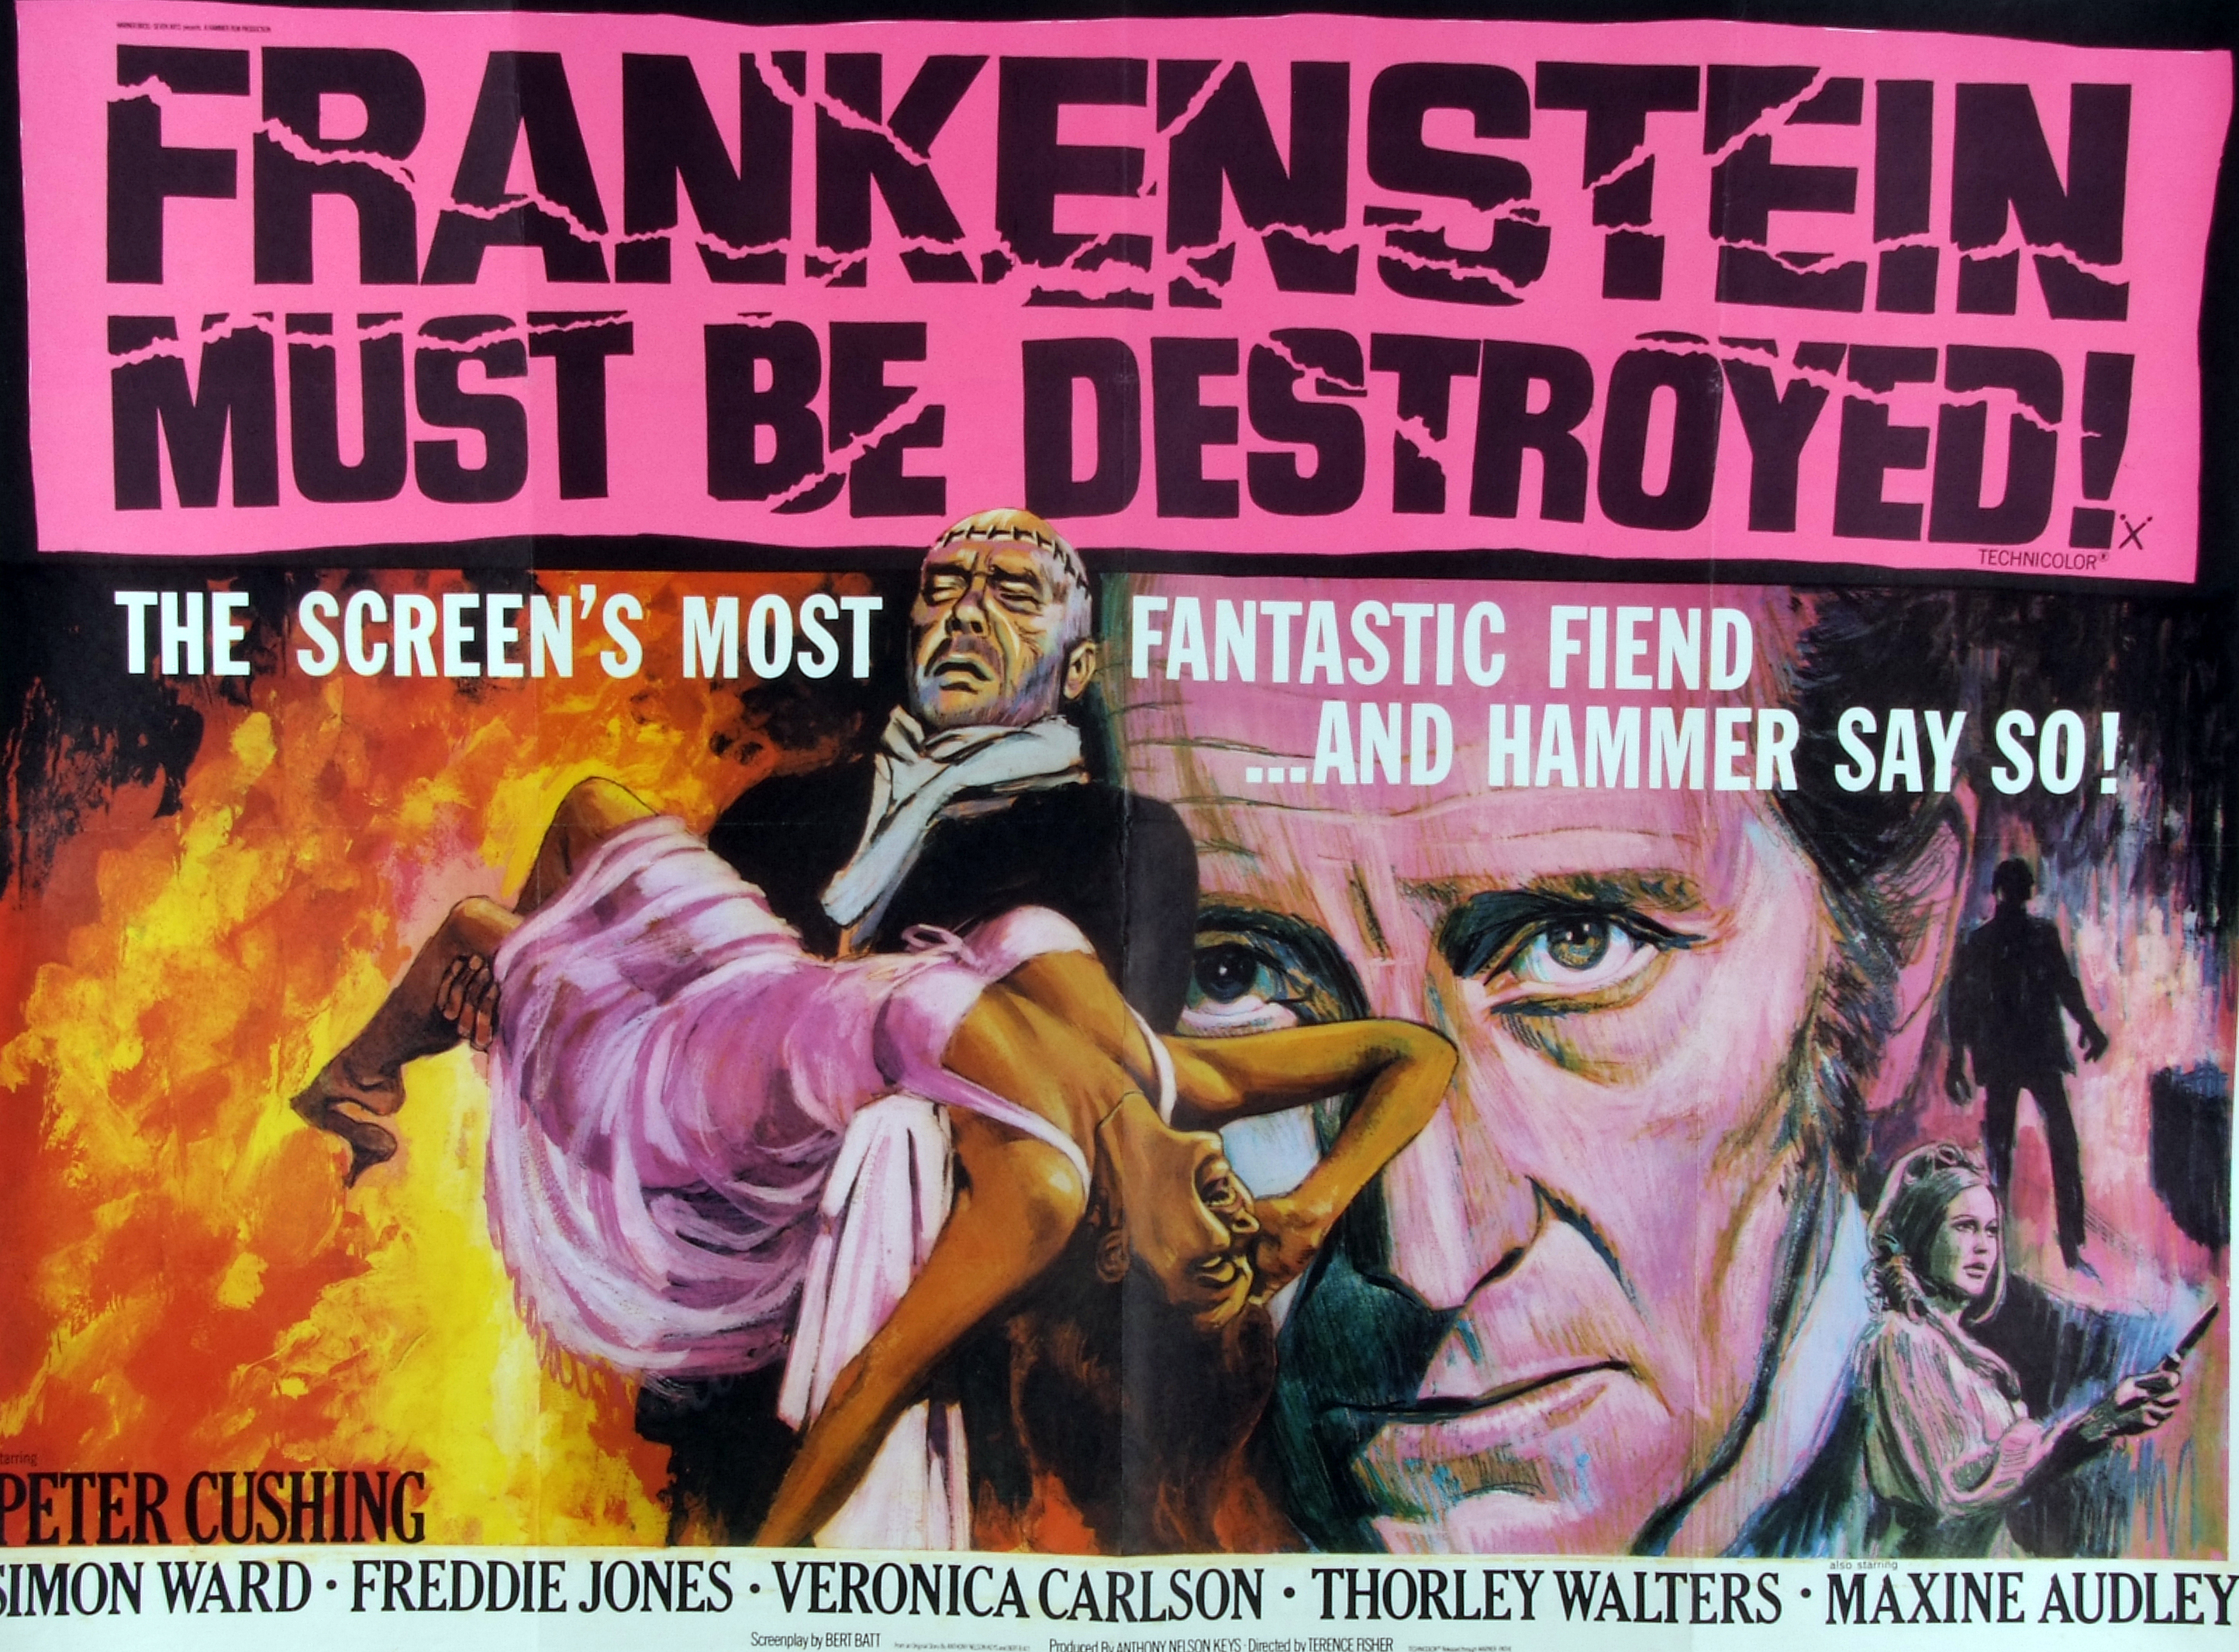 FRANKENSTEIN MUST BE DESTROYED!, film poster, starring Peter Cushing, Quad approx 30" x 40